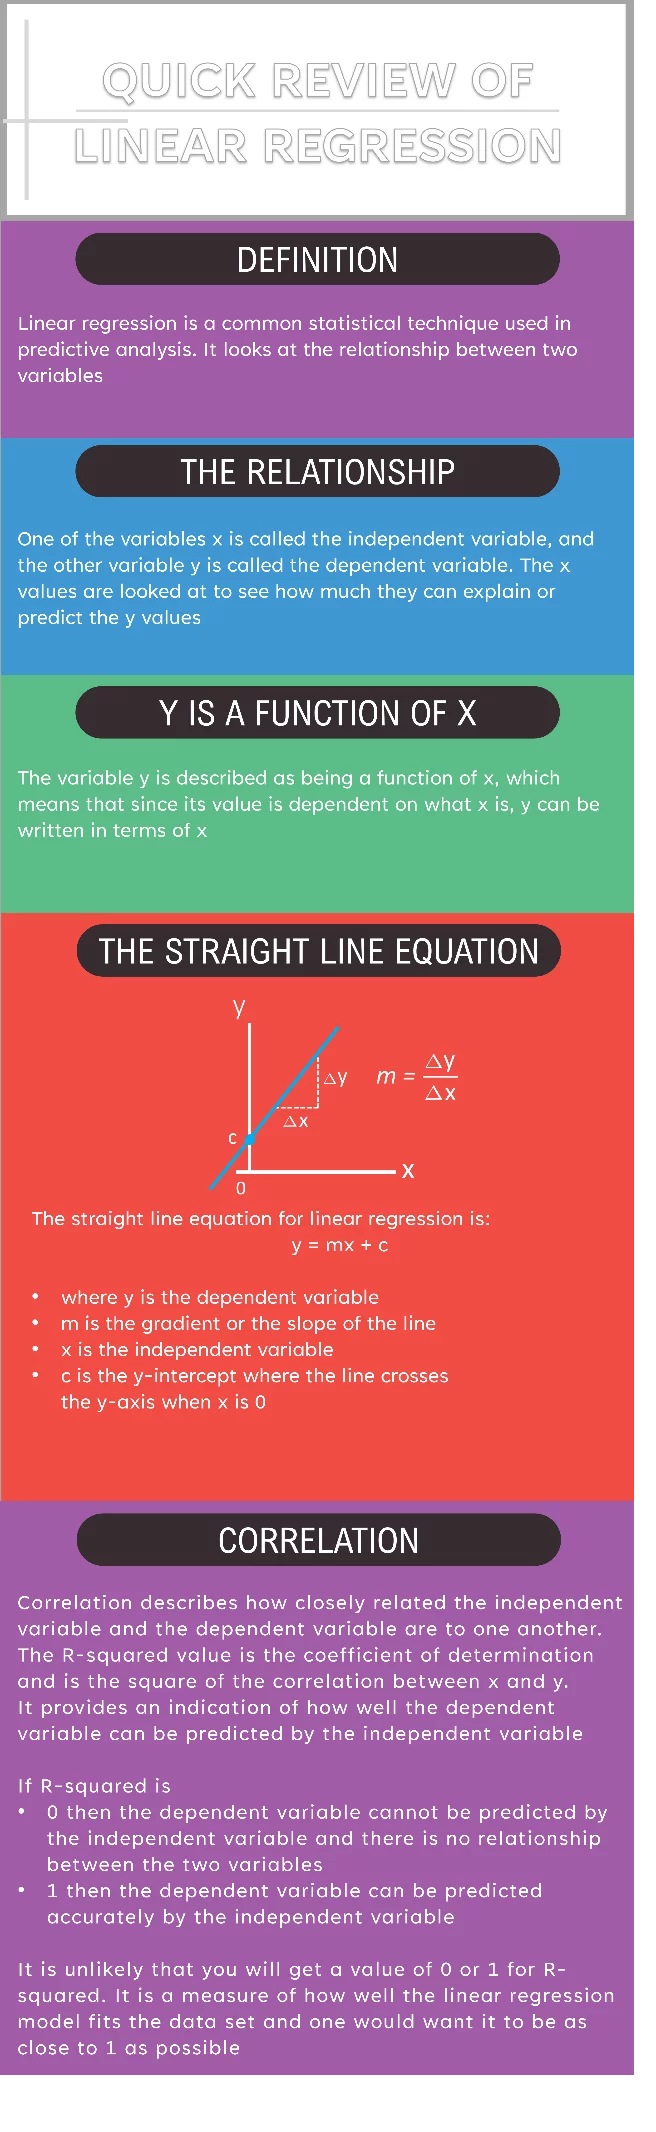 Infographic showing an overview of Linear Regression.